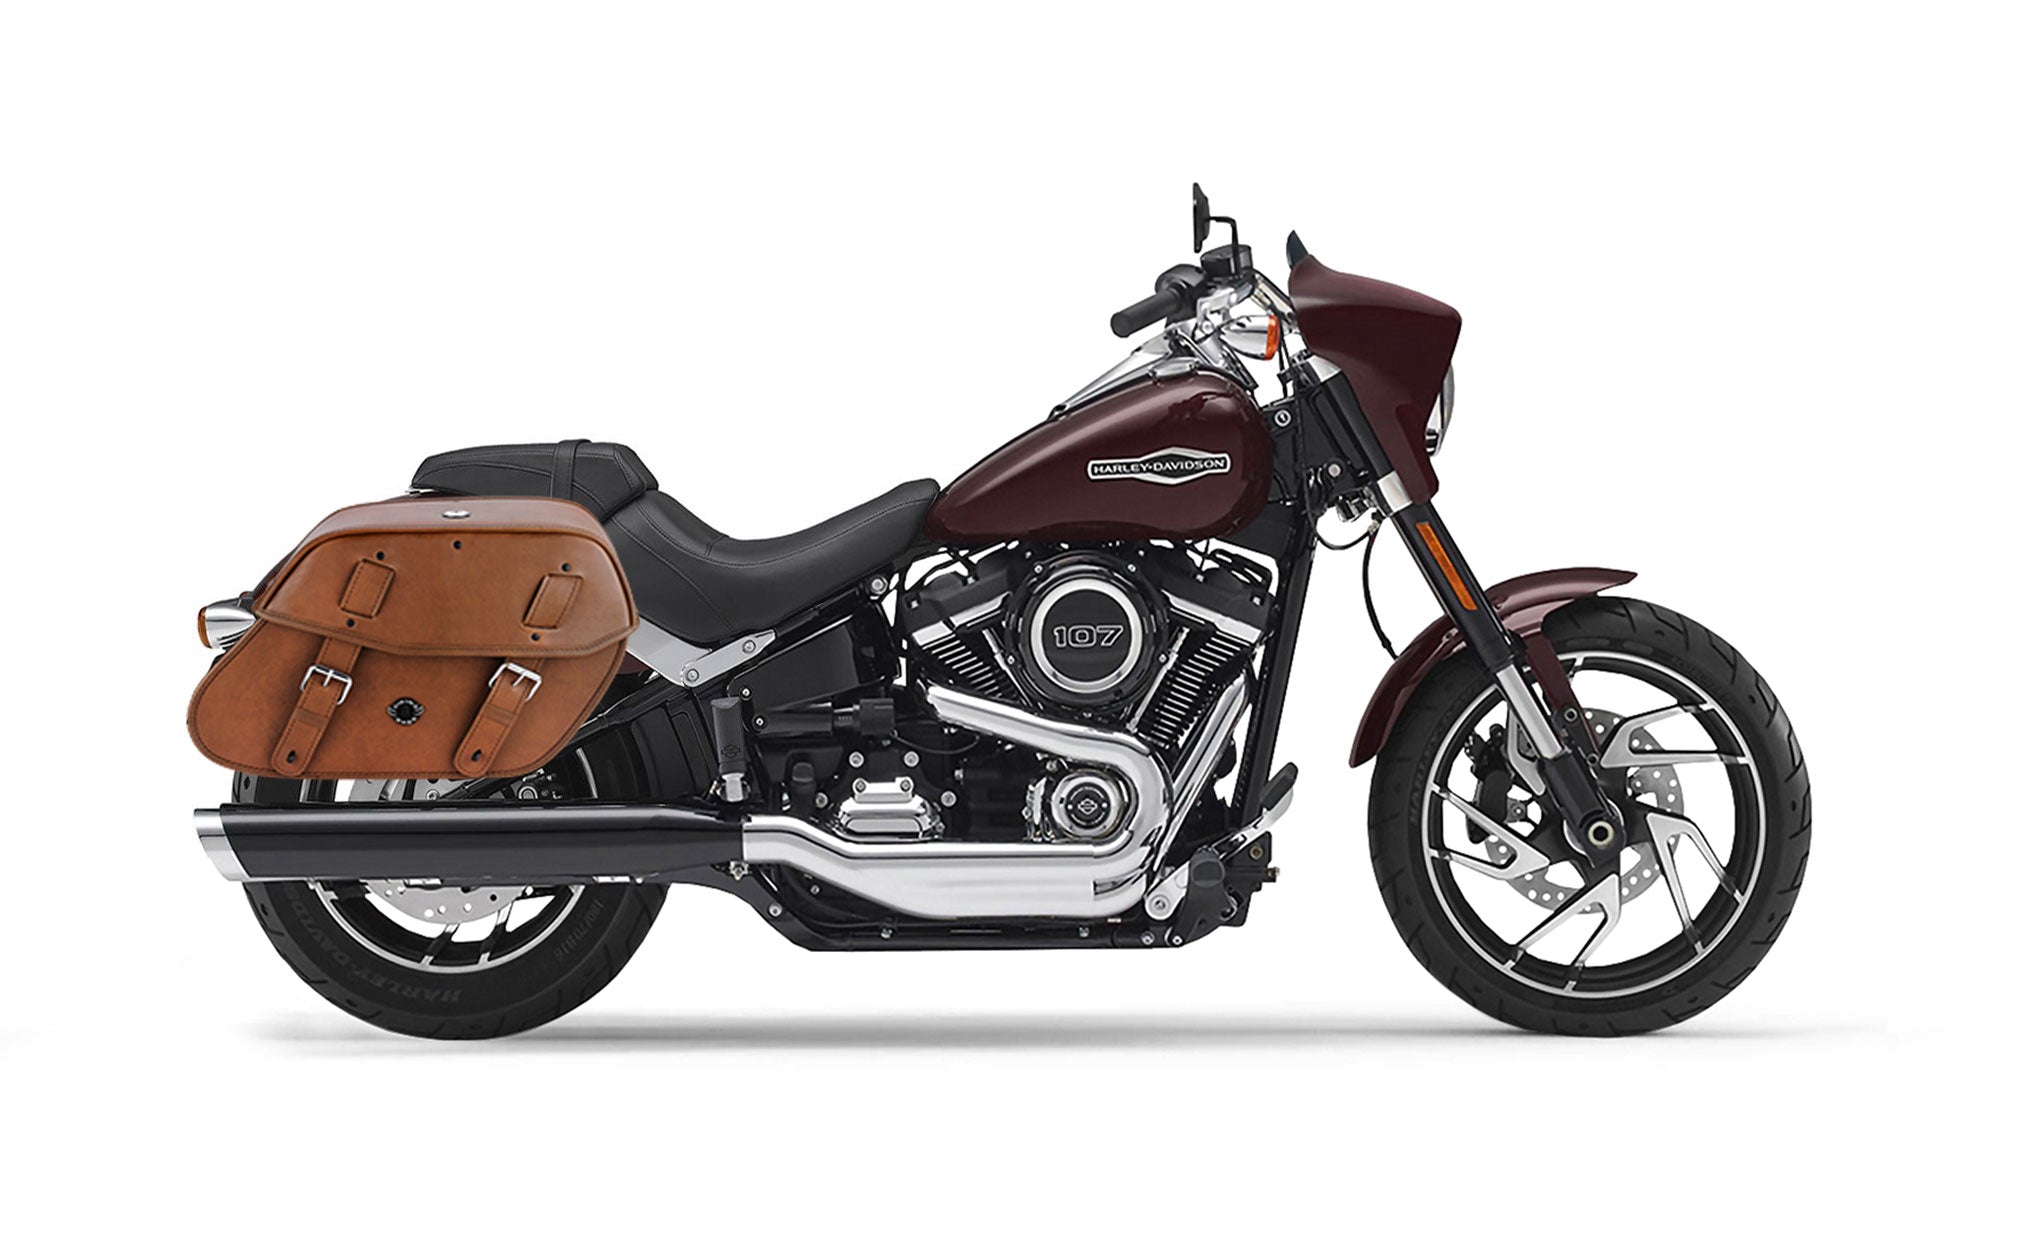 Viking Odin Brown Large Leather Motorcycle Saddlebags For Harley Softail Sport Glide Flsb on Bike Photo @expand